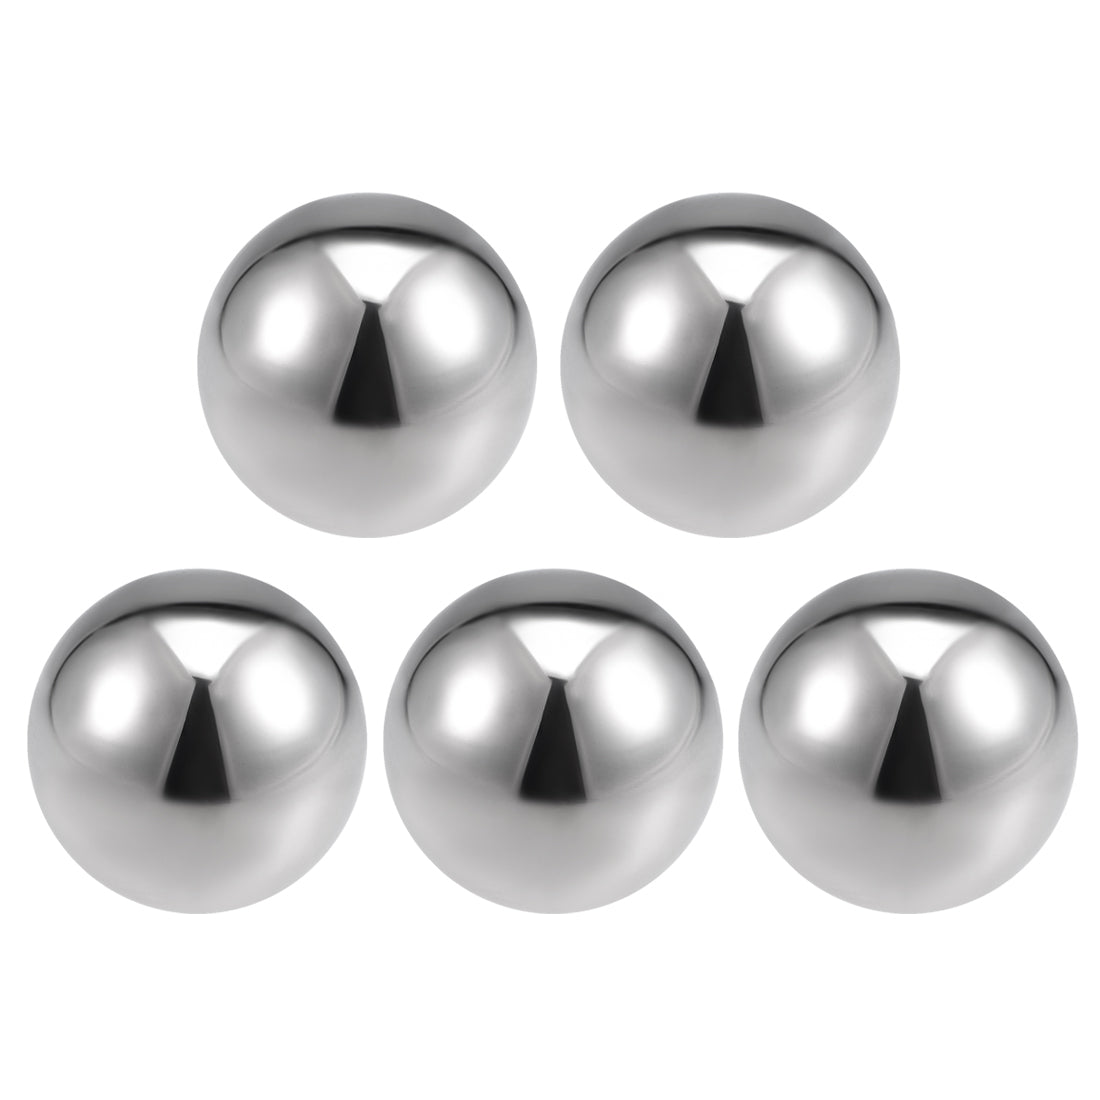 Uxcell Uxcell 41mm(1.61") Dia 304 Stainless Steel Hollow Ball for Home Garden Decoration 16pcs